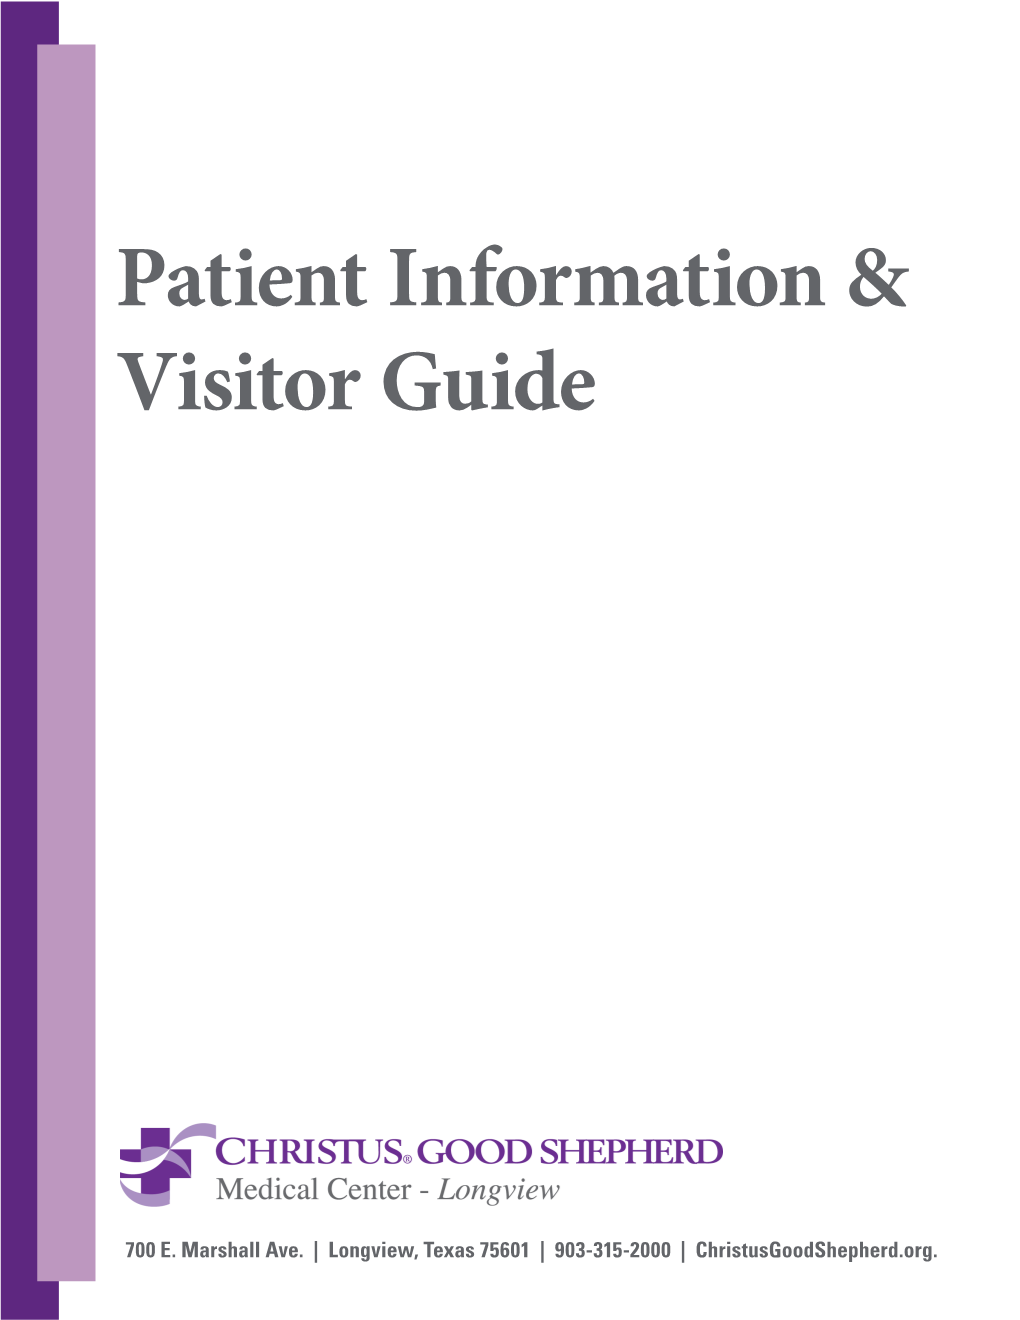 Download Our Patient Guide